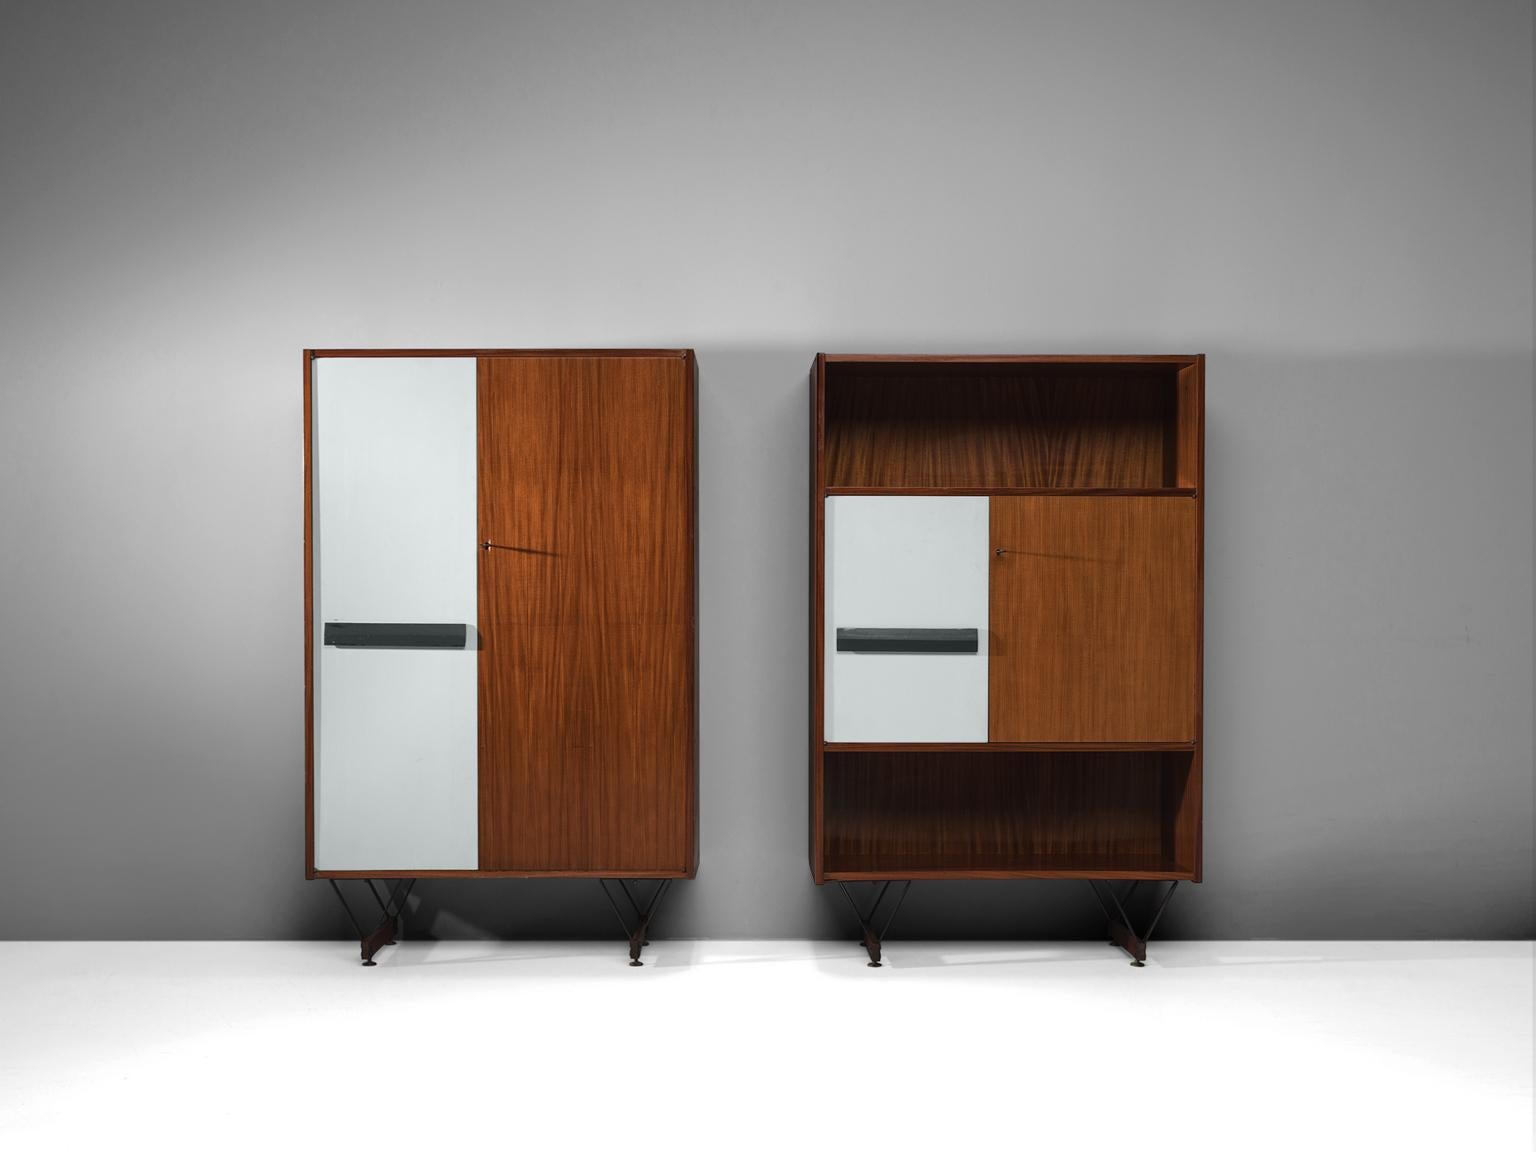 Set of 2 cabinets, walnut, plywood and steel, Italy, 1960s.

This set of wooden cabinets feature the design aesthetics of 1960s in Italy. The refined metal legs give the heavy cabinets a floating character. The outside of the cabinets are made of